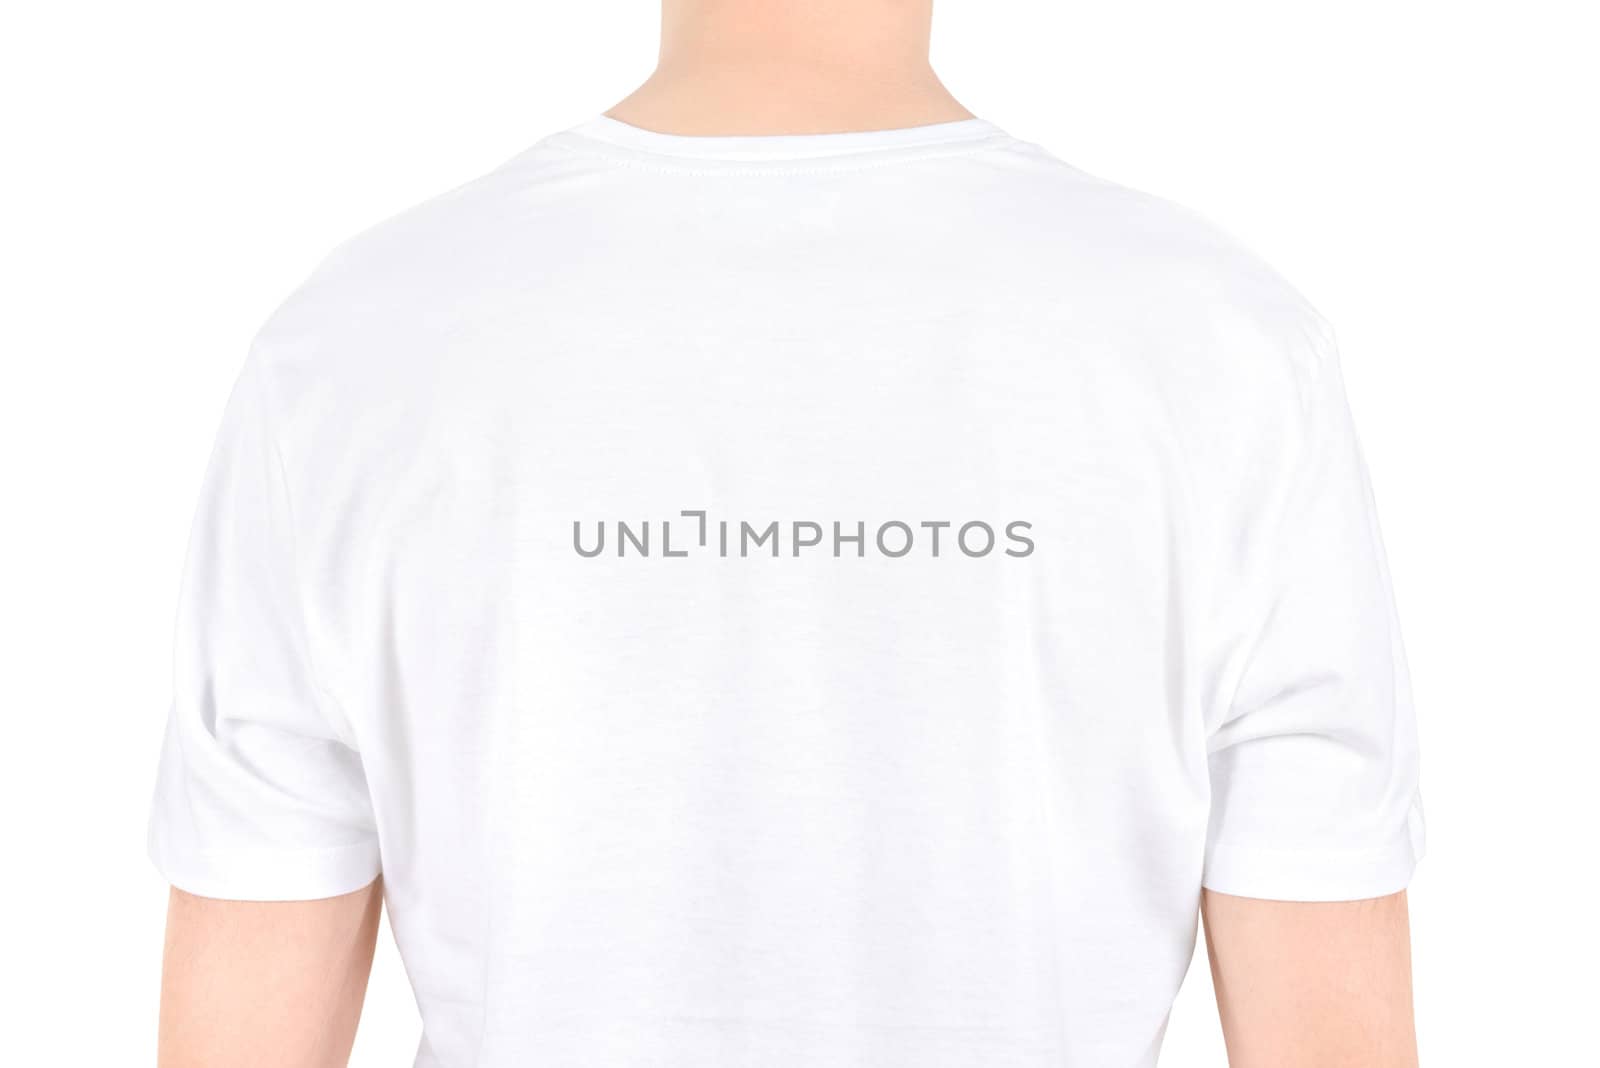 Advertising space on a white t-shirt by bloomua